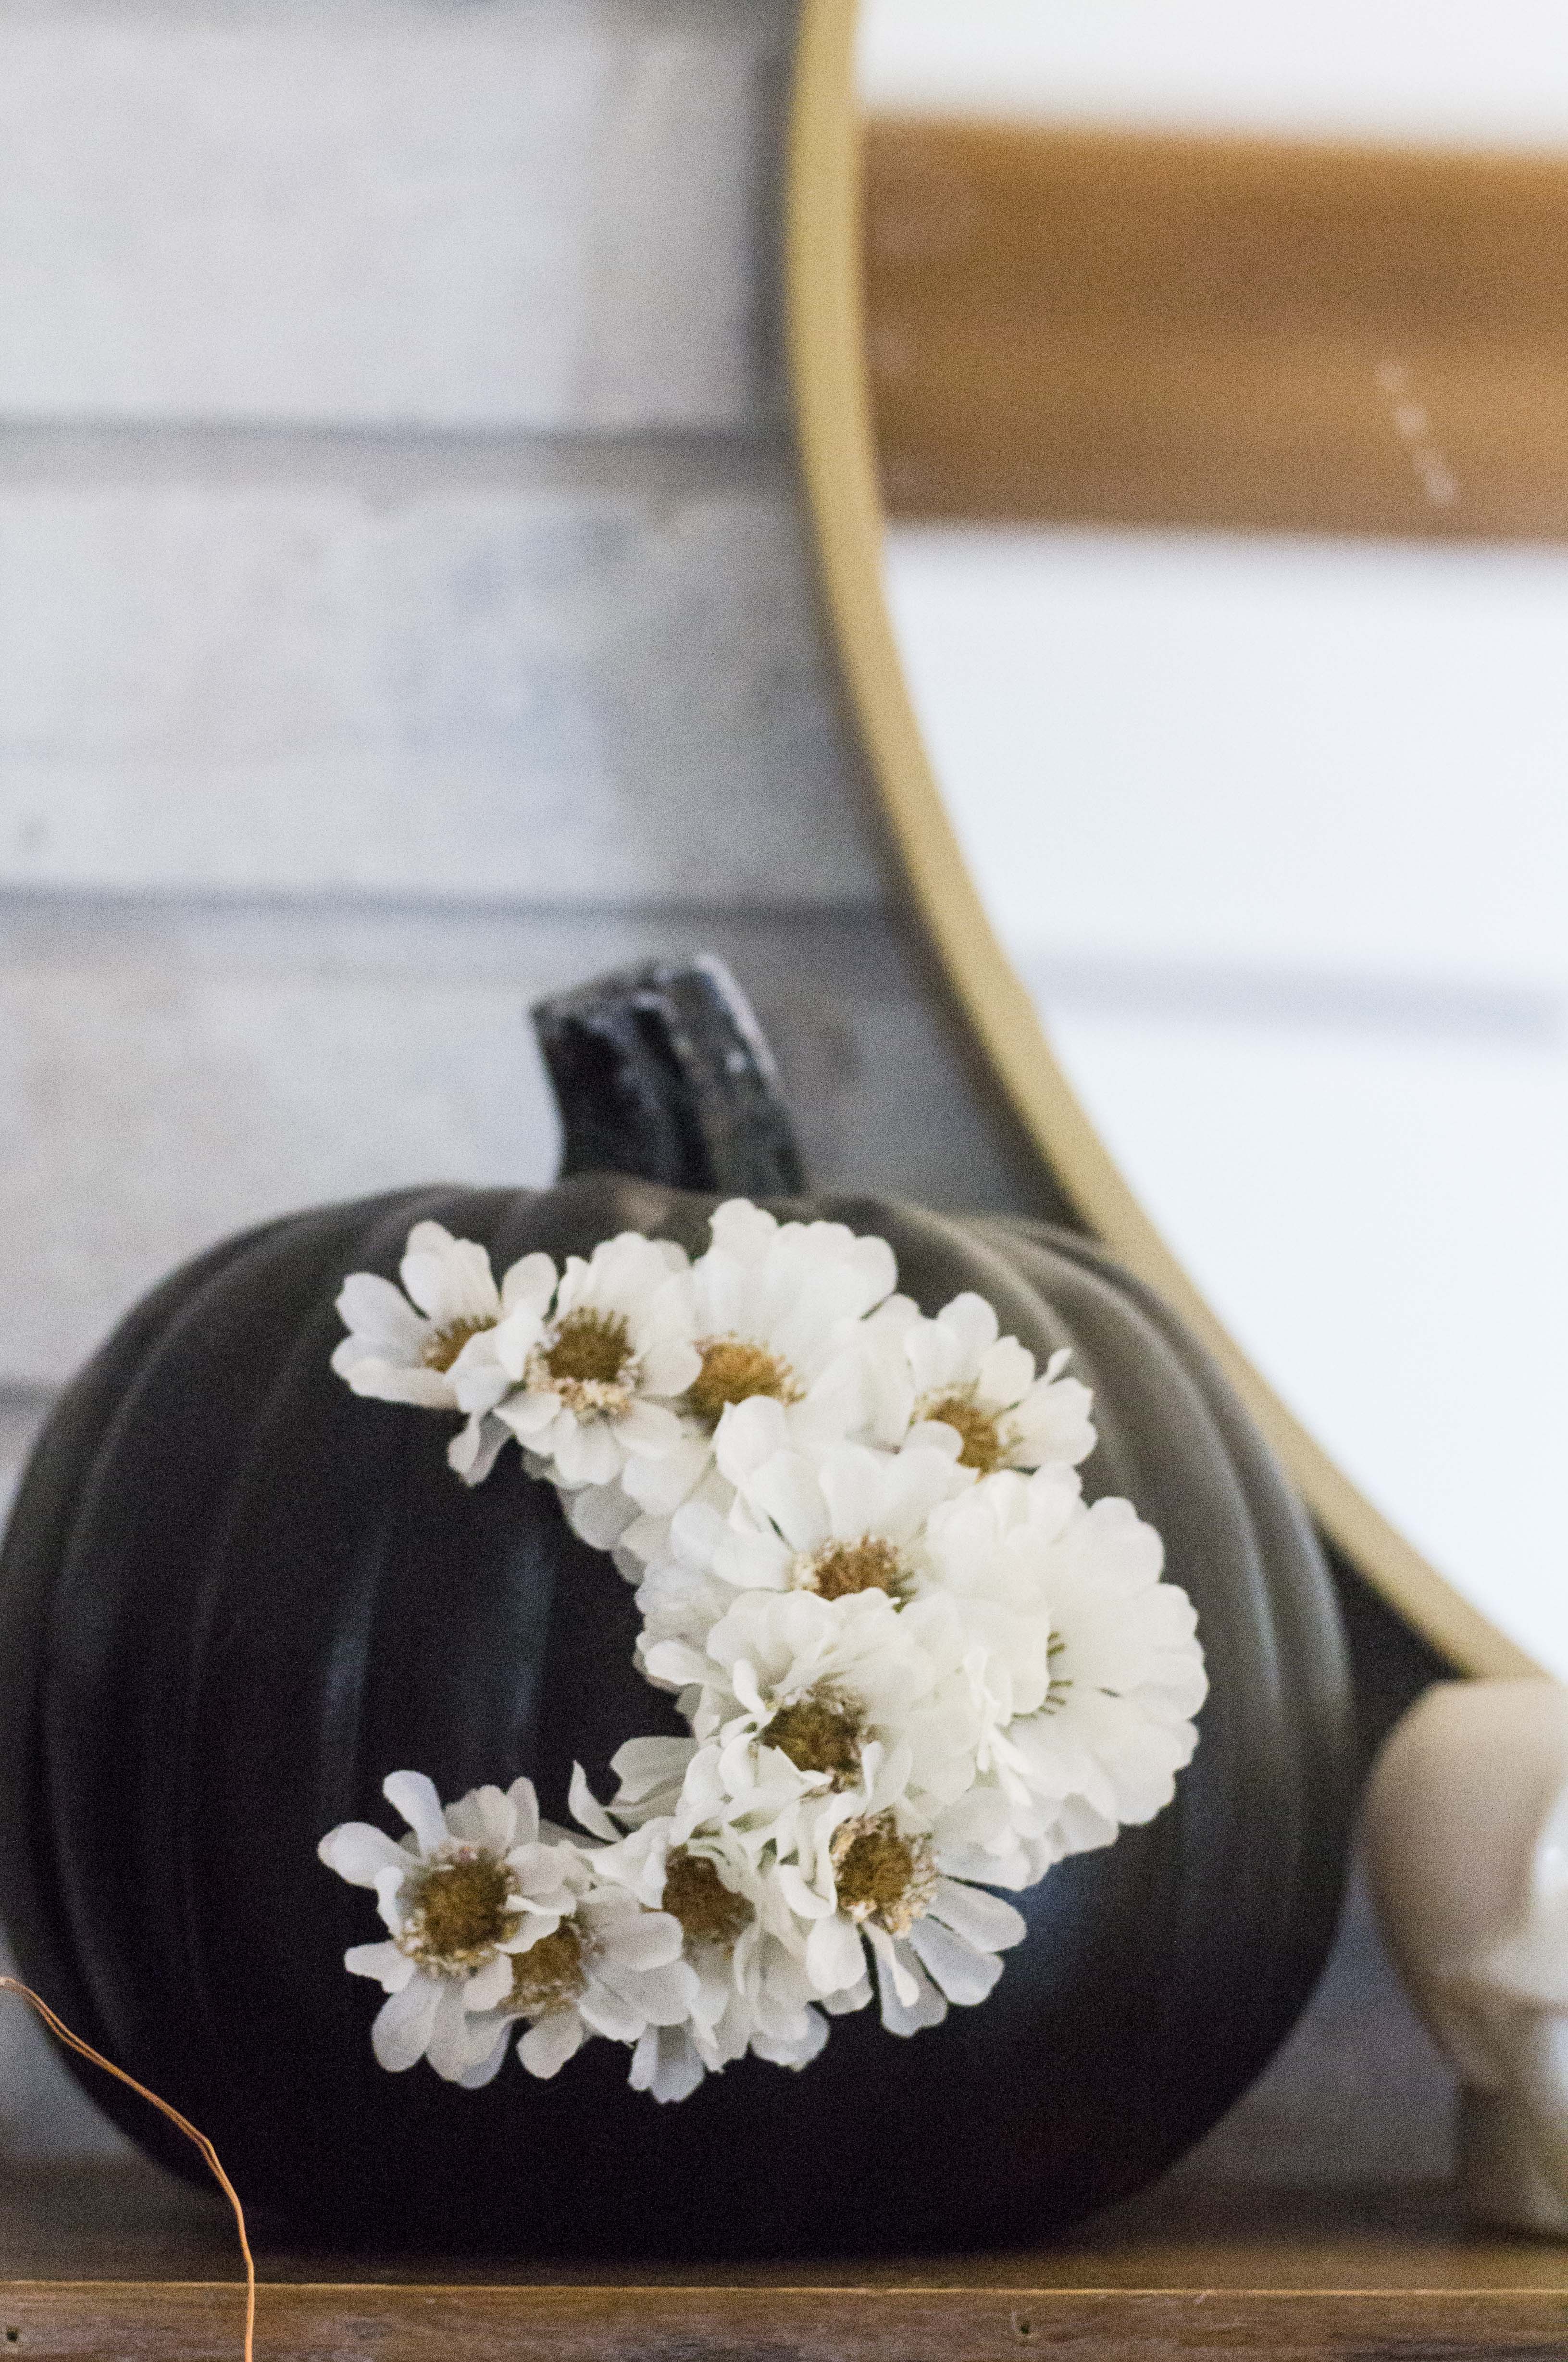 Decorate your pumpkin with flowers this autumn